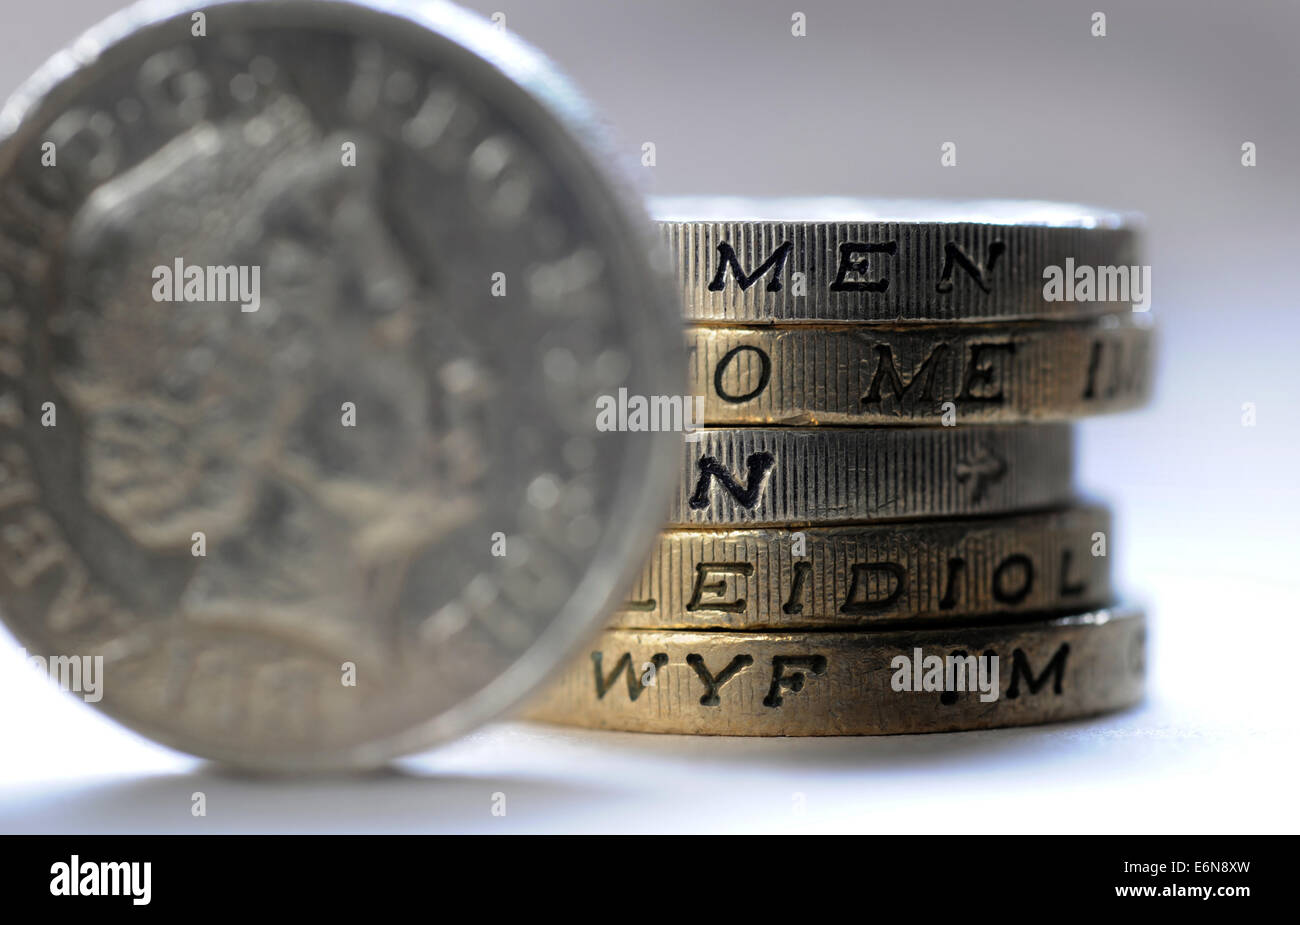 BRITISH ONE POUND COINS WITH EDGE LETTERS SPELLING 'MONEY' RE WAGES INCOMES MORTGAGES CURRENCY HOUSEHOLD BUDGETS CASH SAVINGS UK Stock Photo